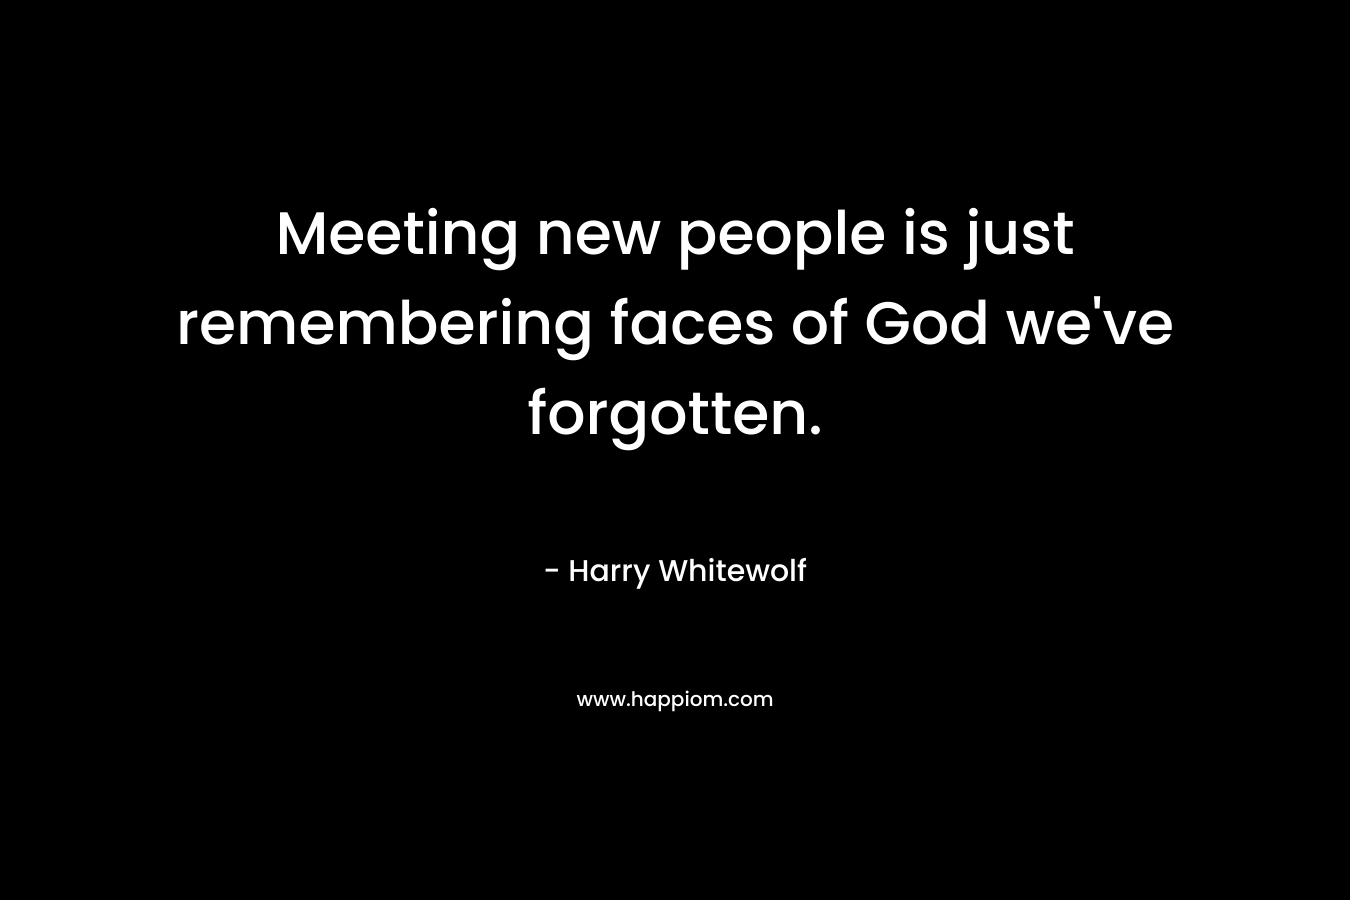 Meeting new people is just remembering faces of God we’ve forgotten. – Harry Whitewolf